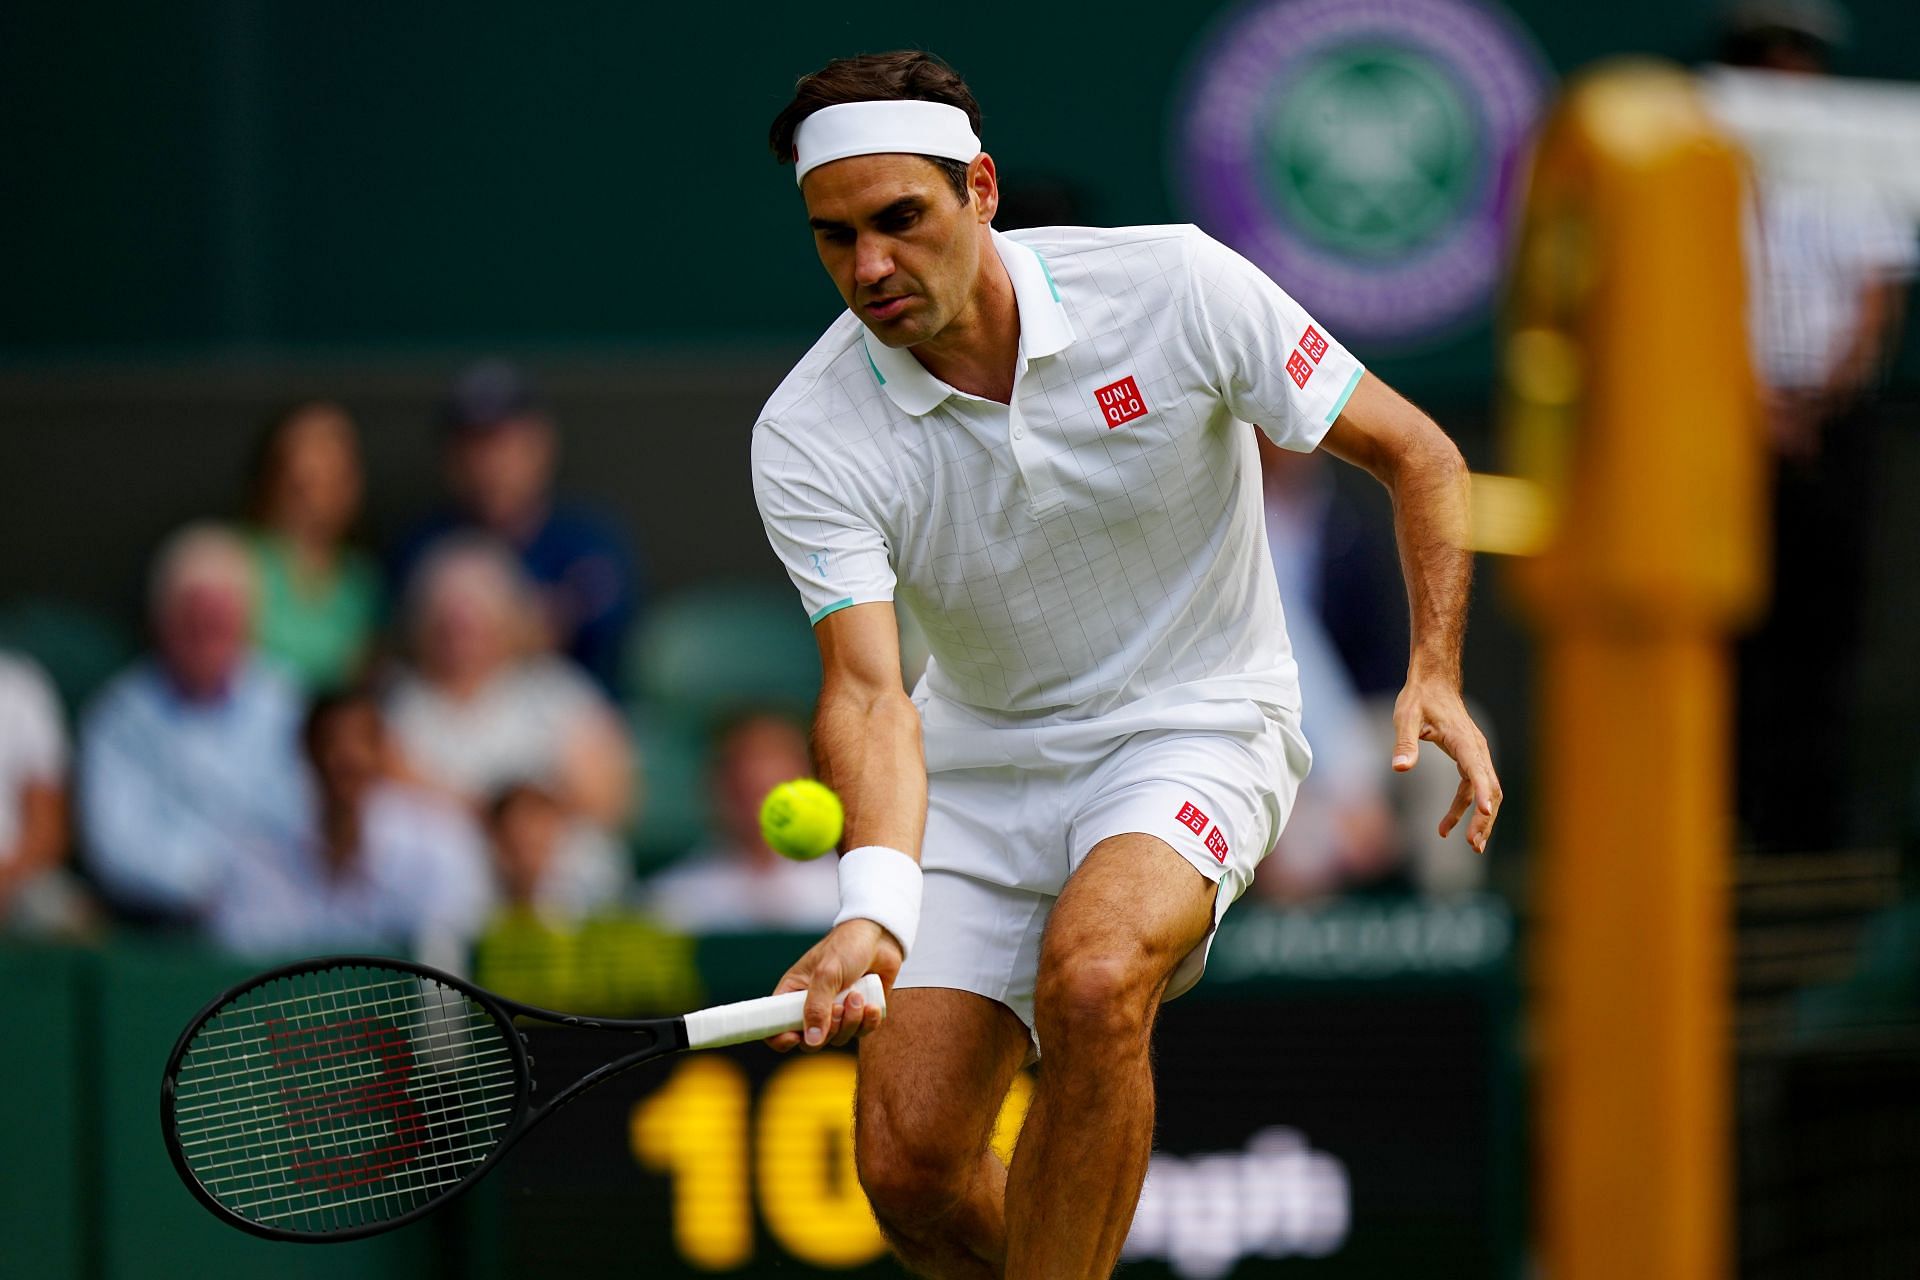 The 2022 Wimbledon may not be fortunate enough to witness Roger Federer&#039;s return to action